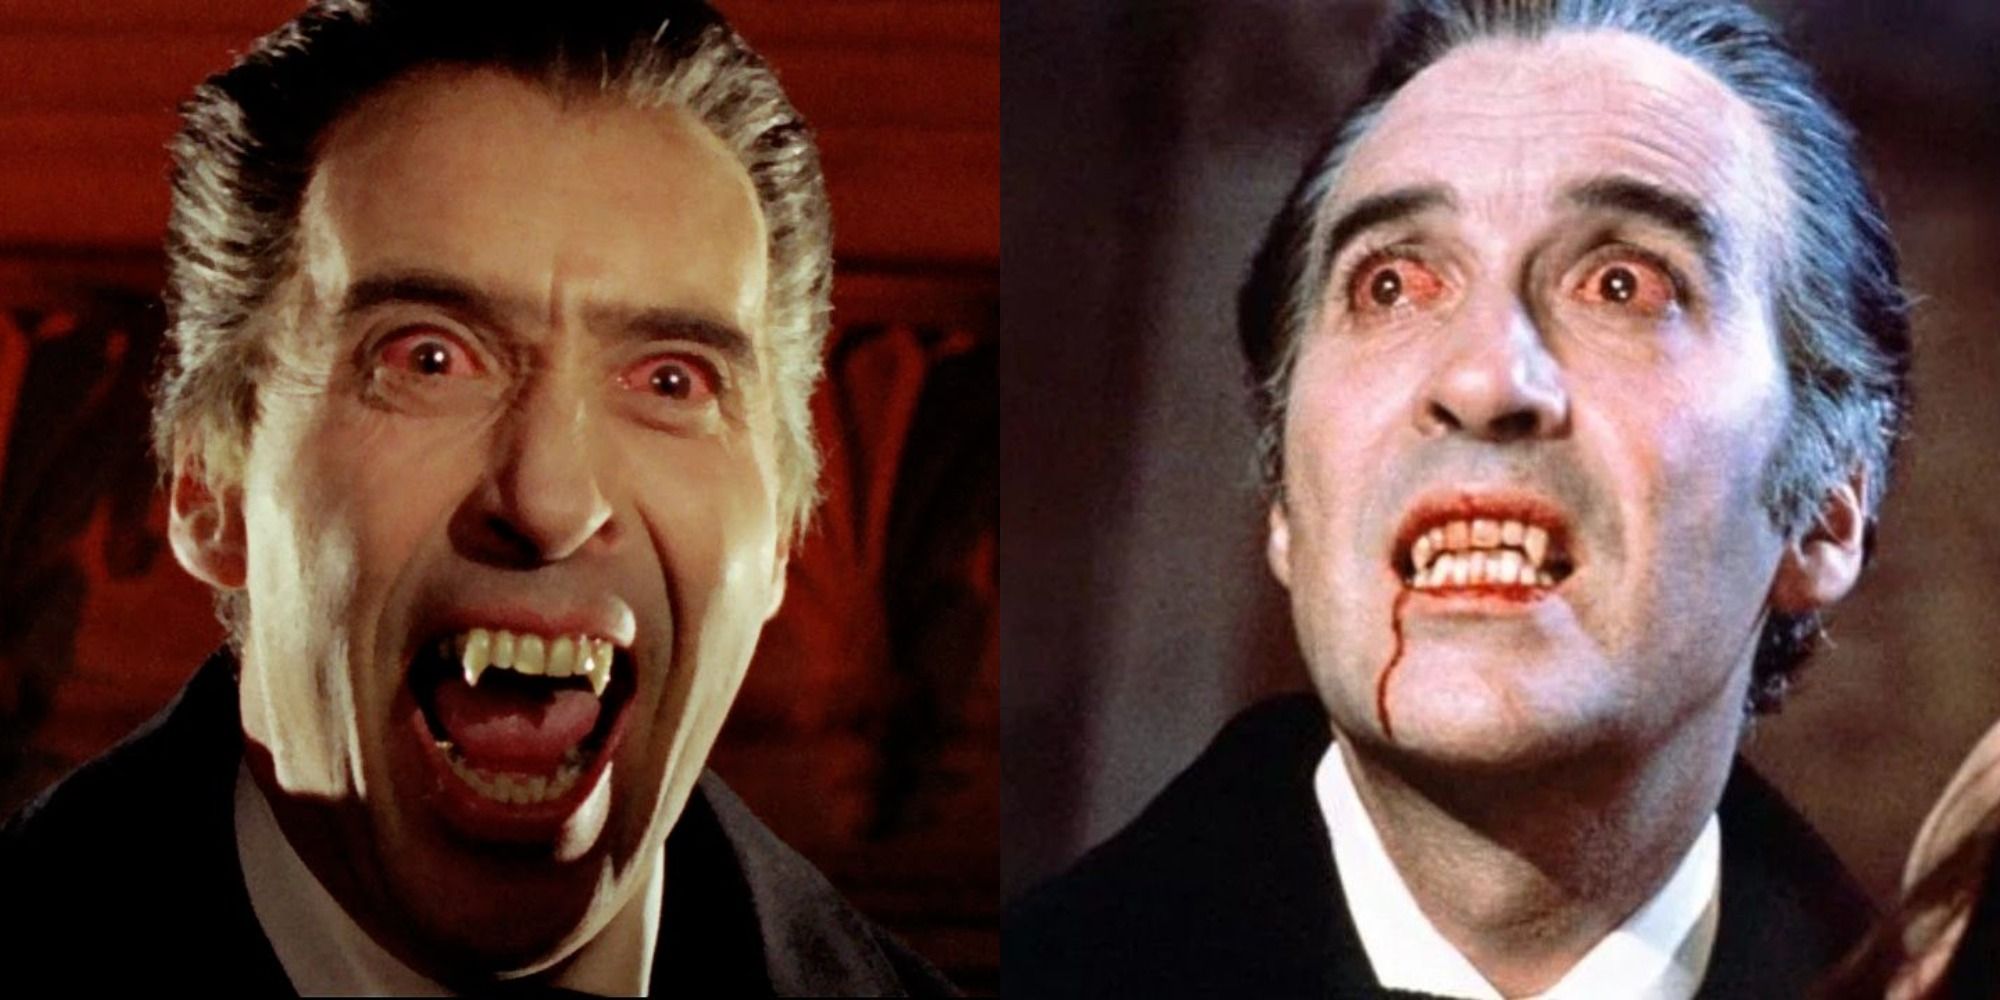 Two side by side images of Christopher Lee as Dracula